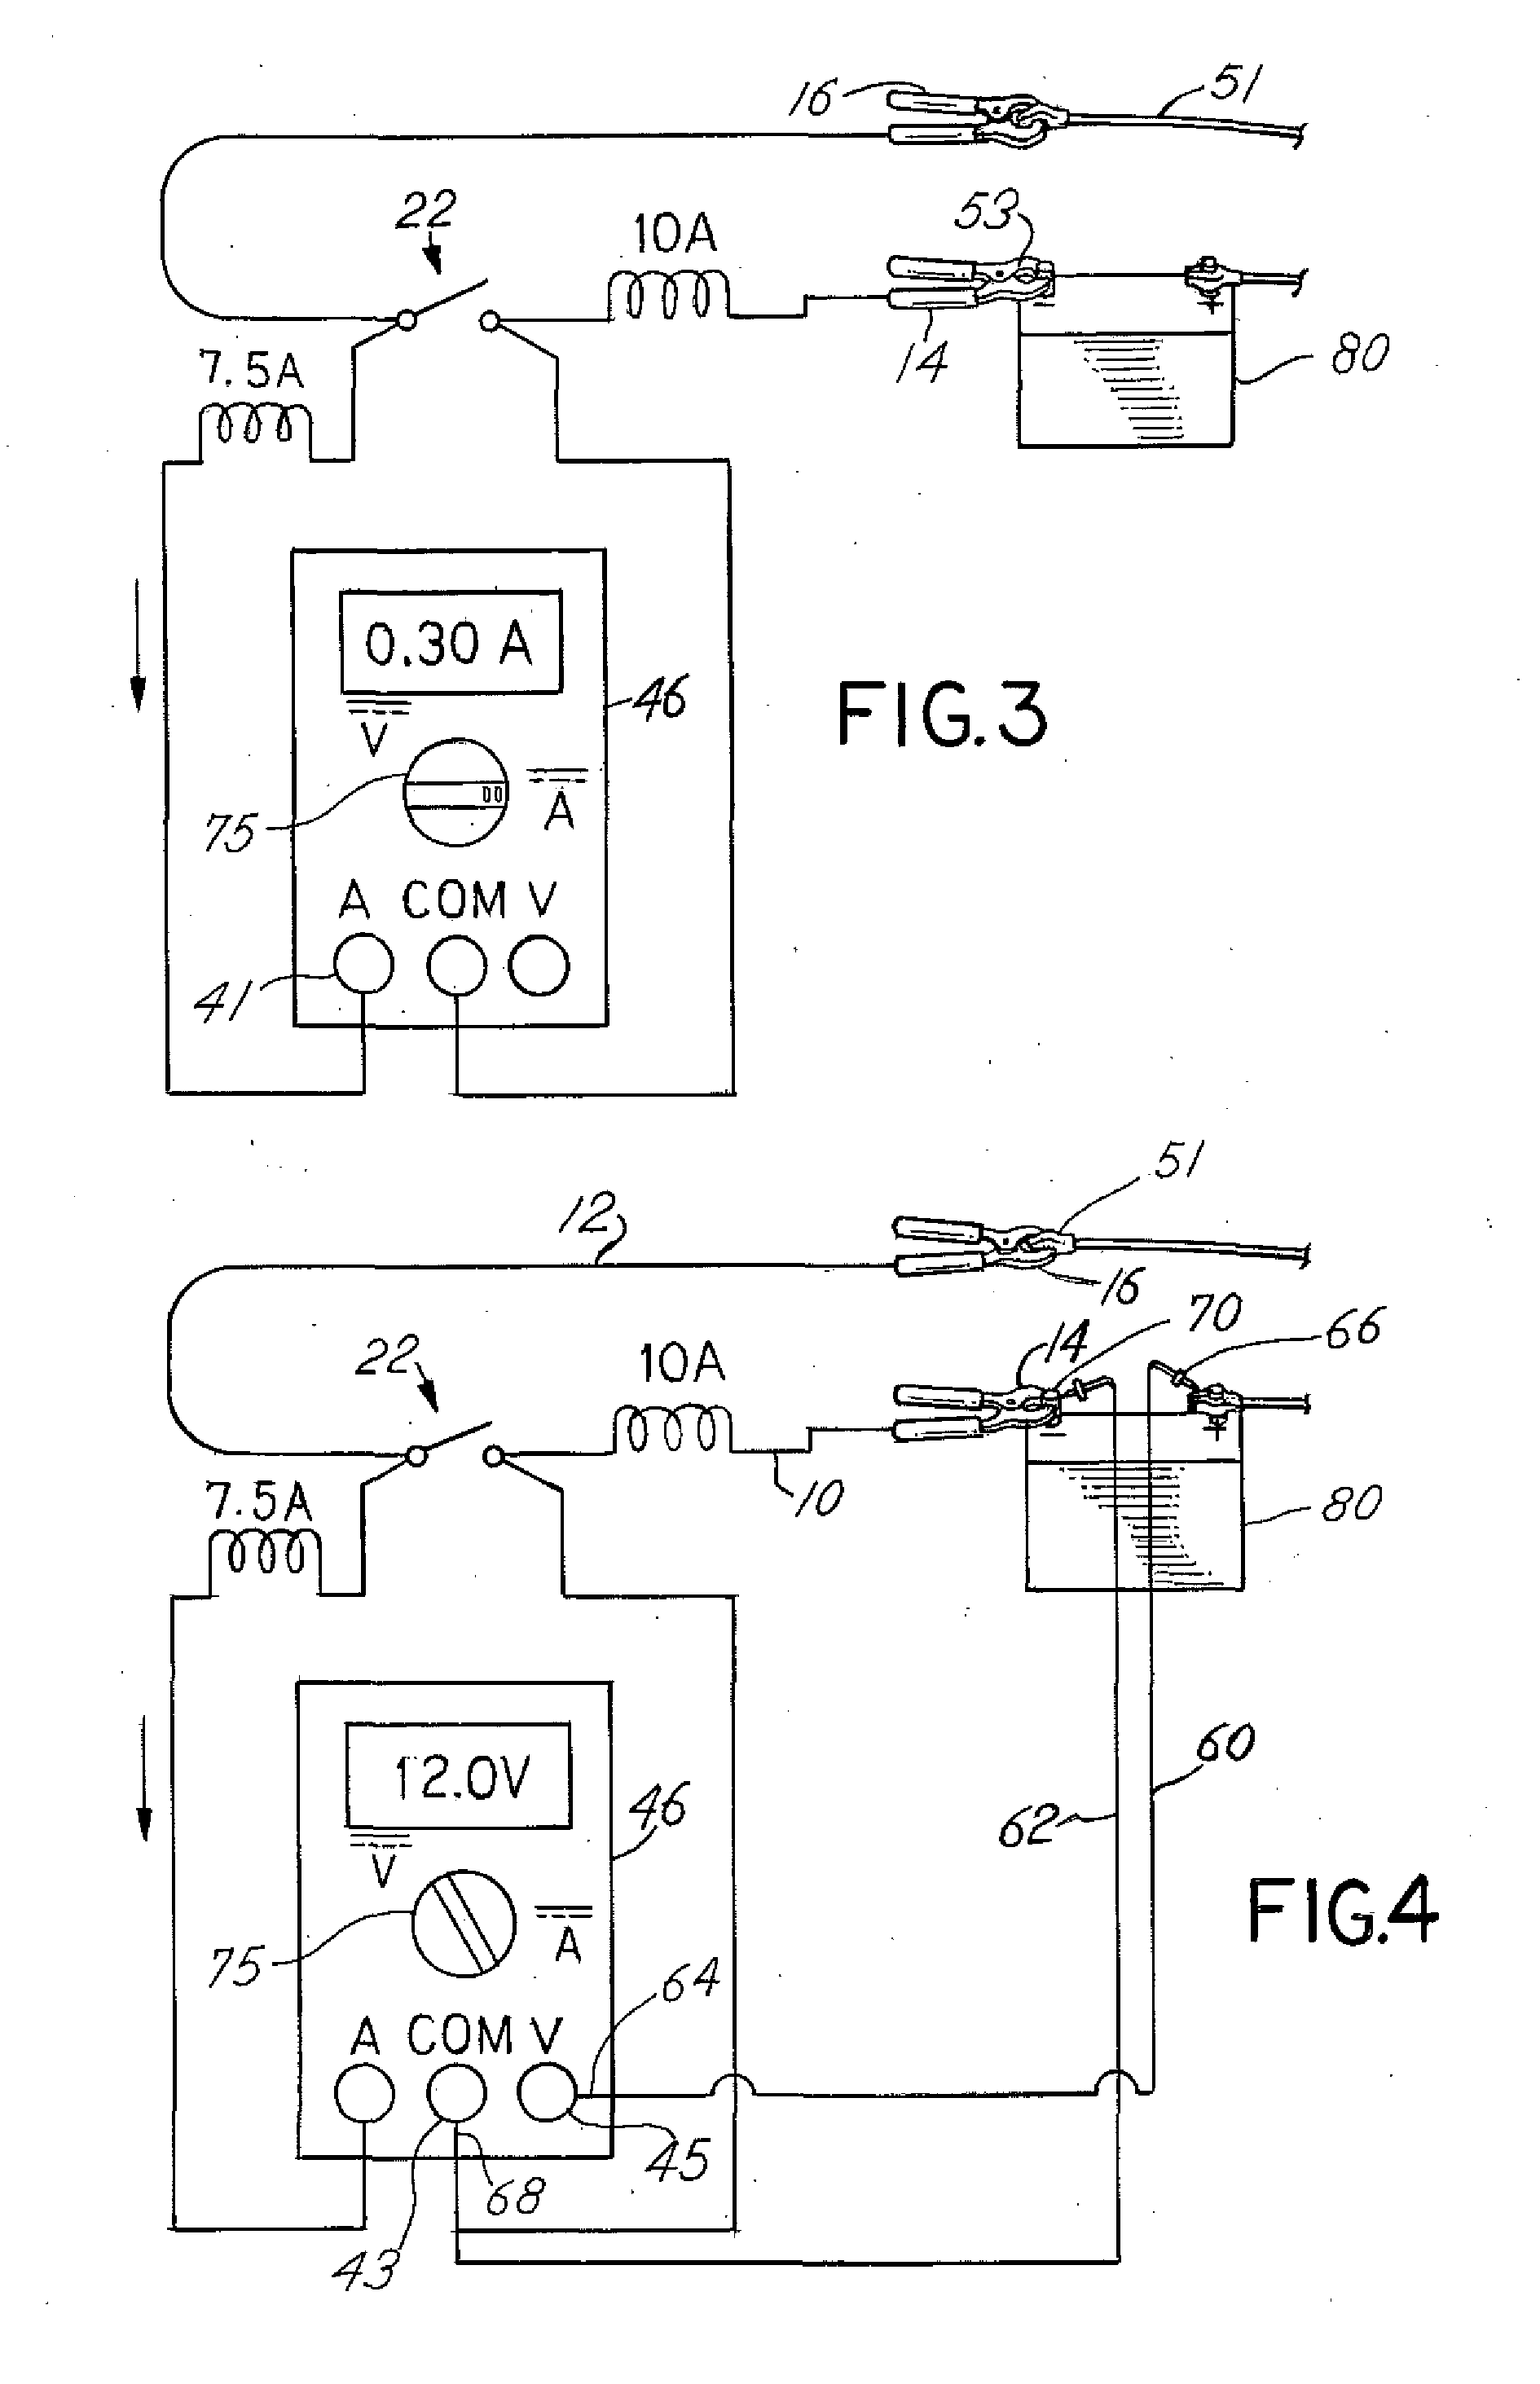 Parasitic battery drain test assembly for multiple component vehicle circuitry analysis